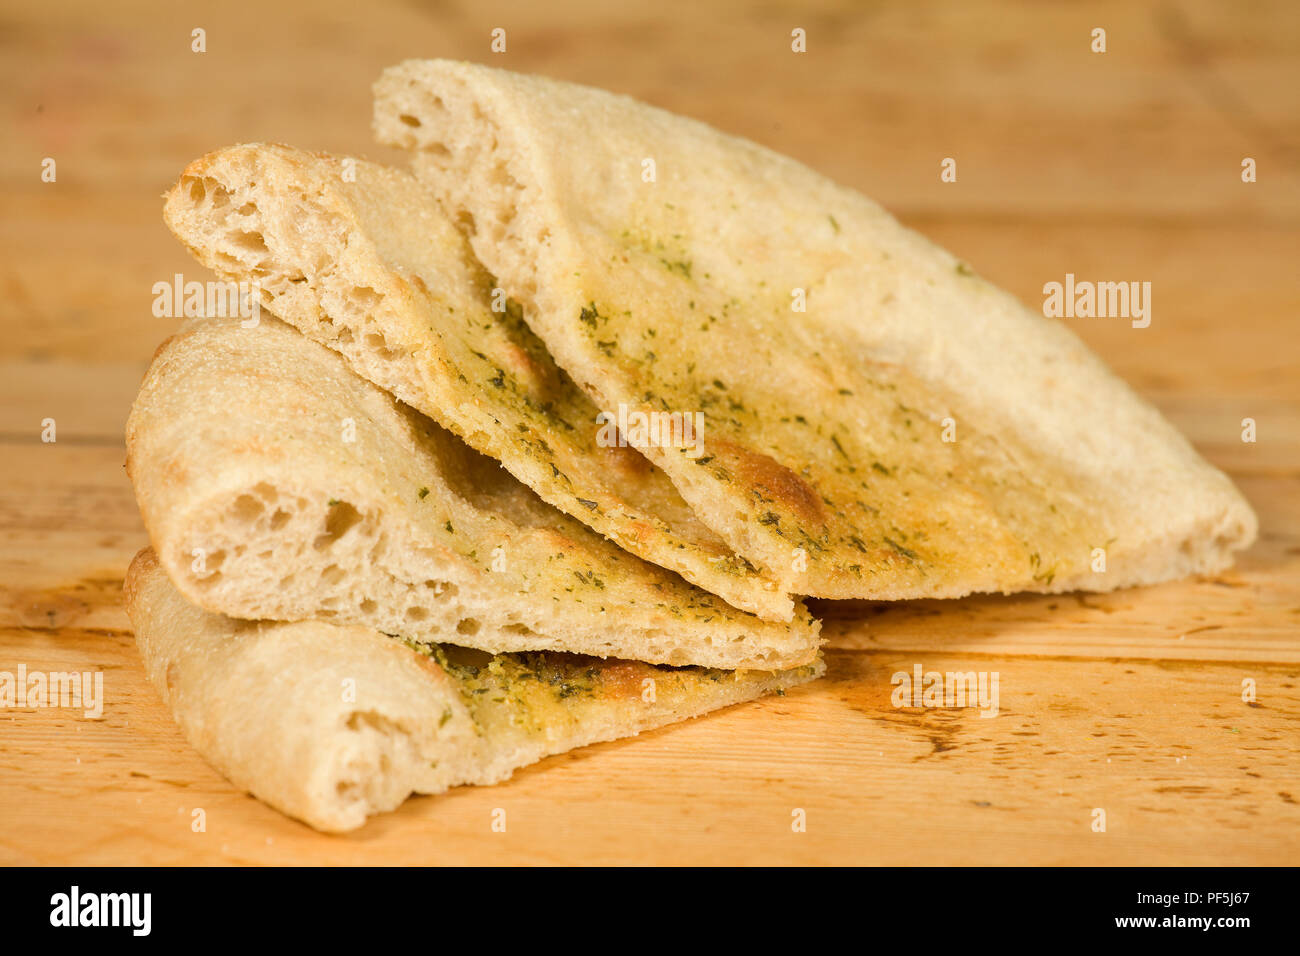 Sliced flat bread on table Stock Photo